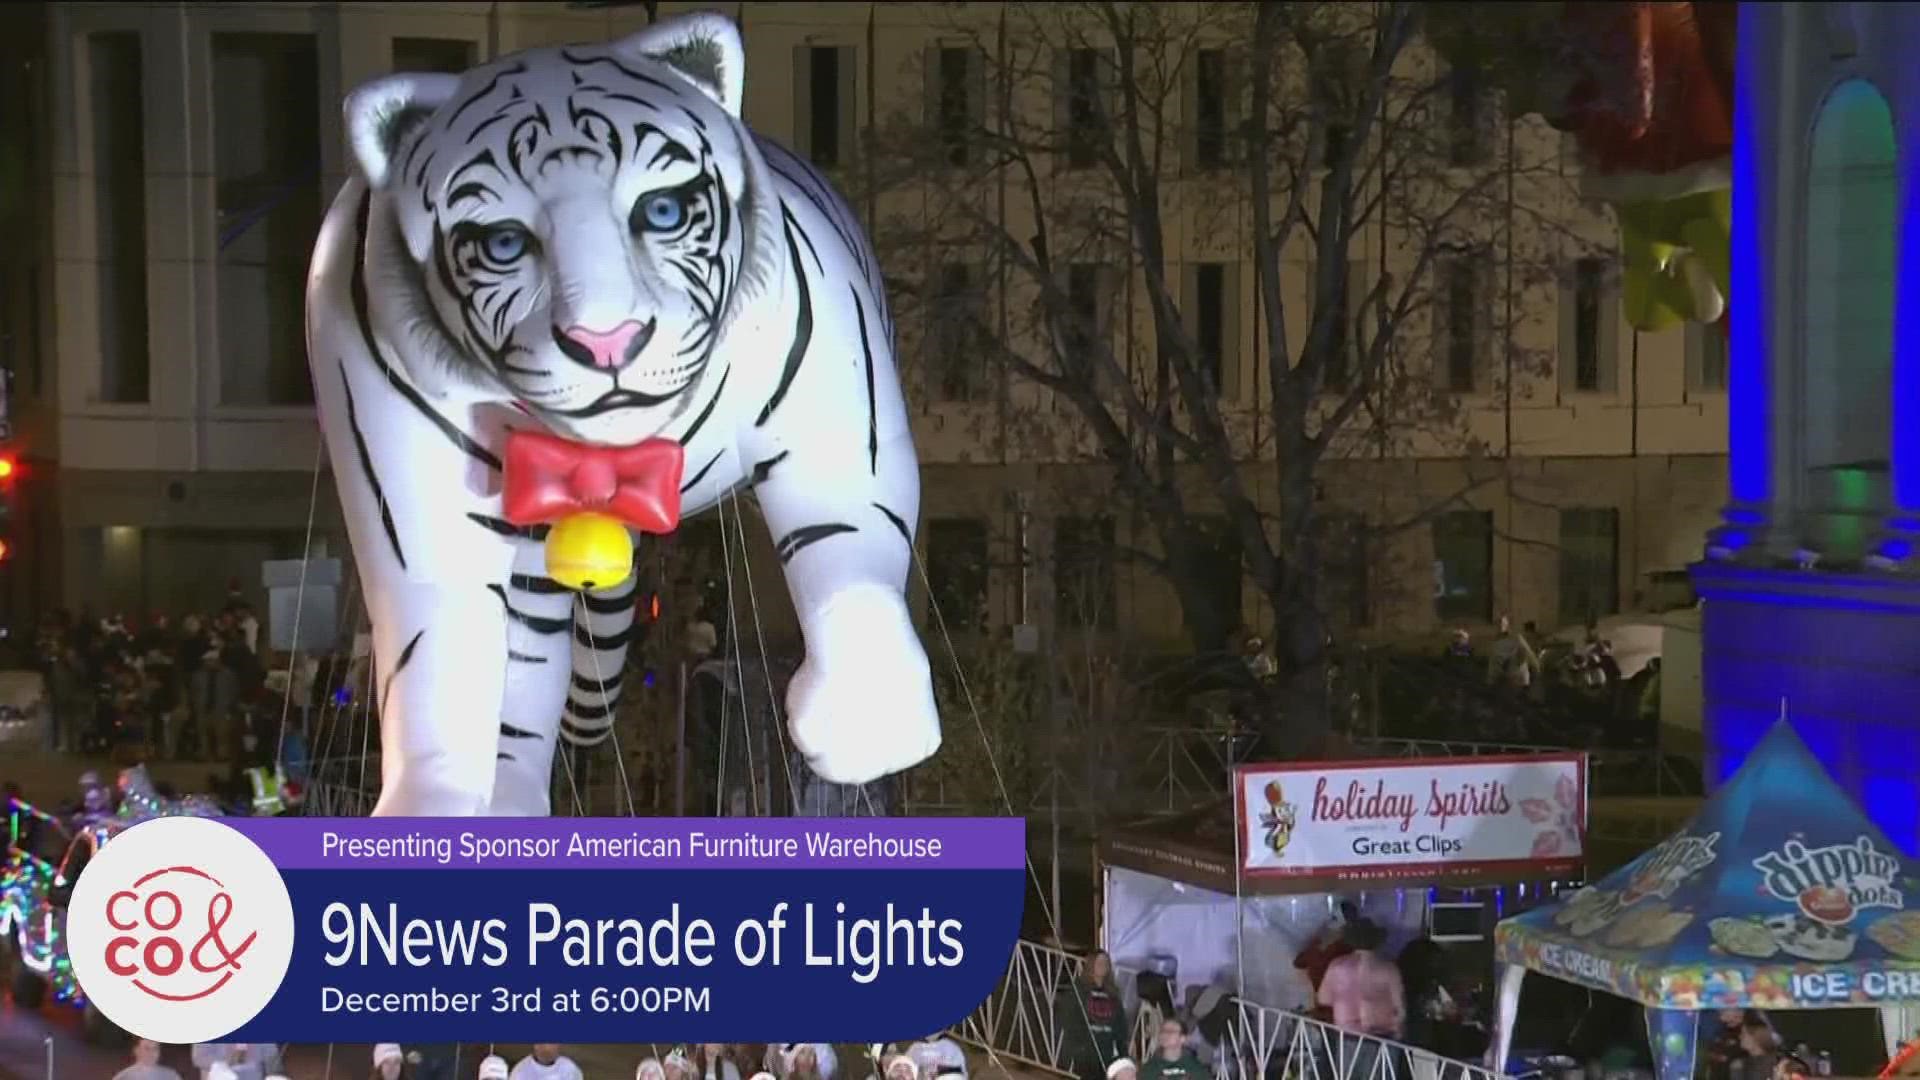 The 48th annual 9news Parade of Lights is December 3rd at 6:00pm. For more information visit DenverParadeofLights.com. Watch the end of the video for a special cake.